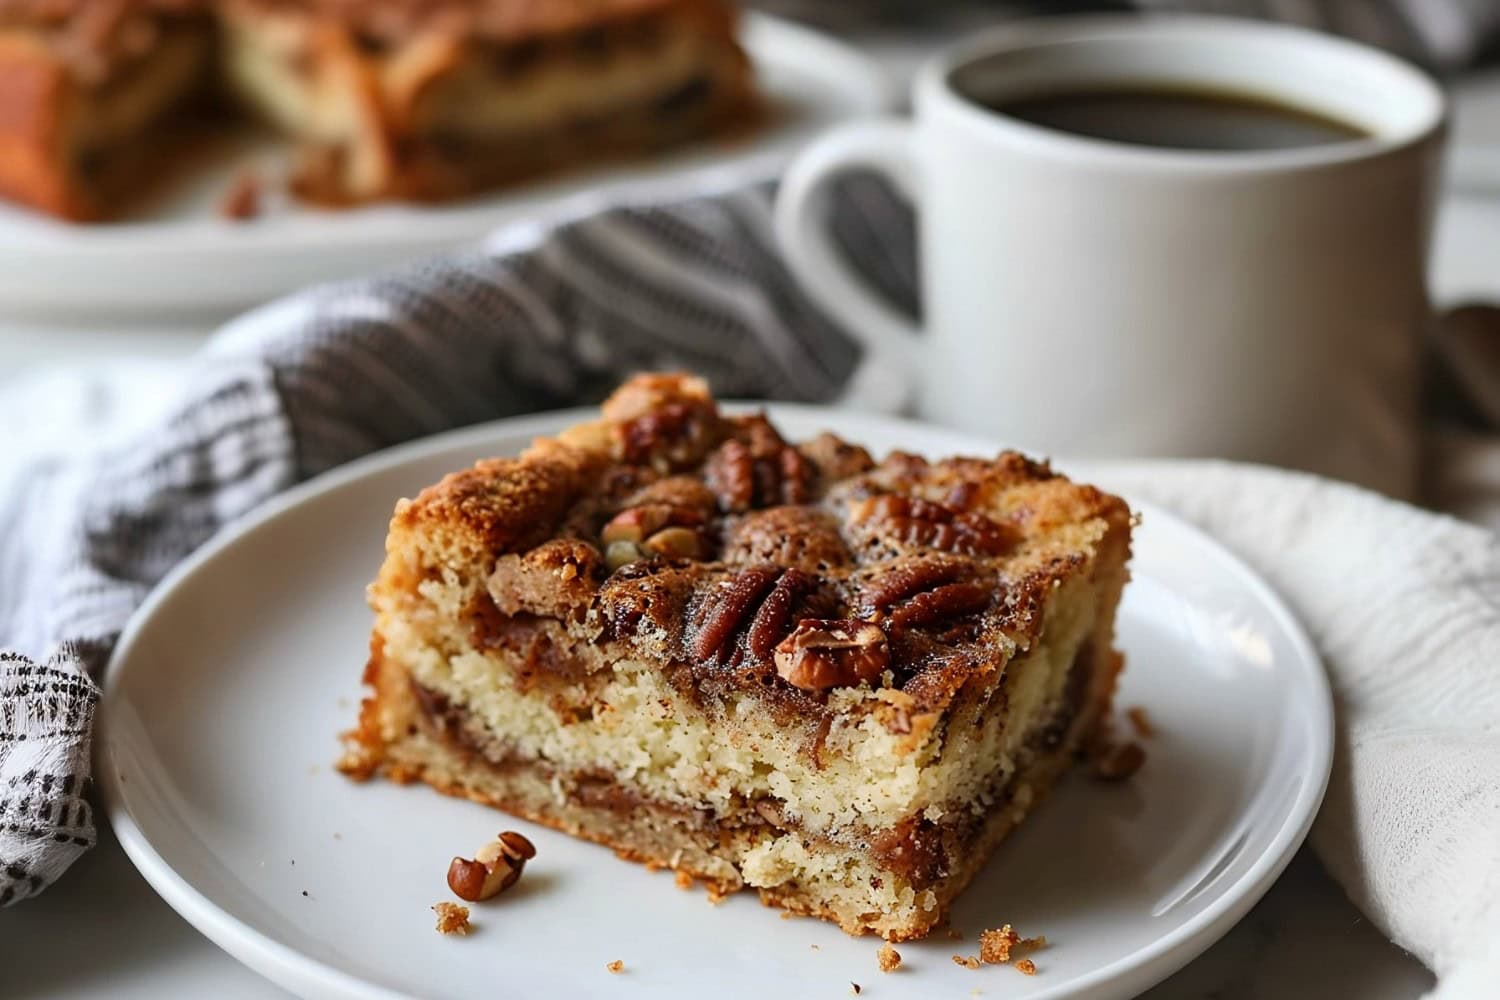 Sour Cream Coffee Cake on a Plate with a Mug of Coffee and More Cake in the Background